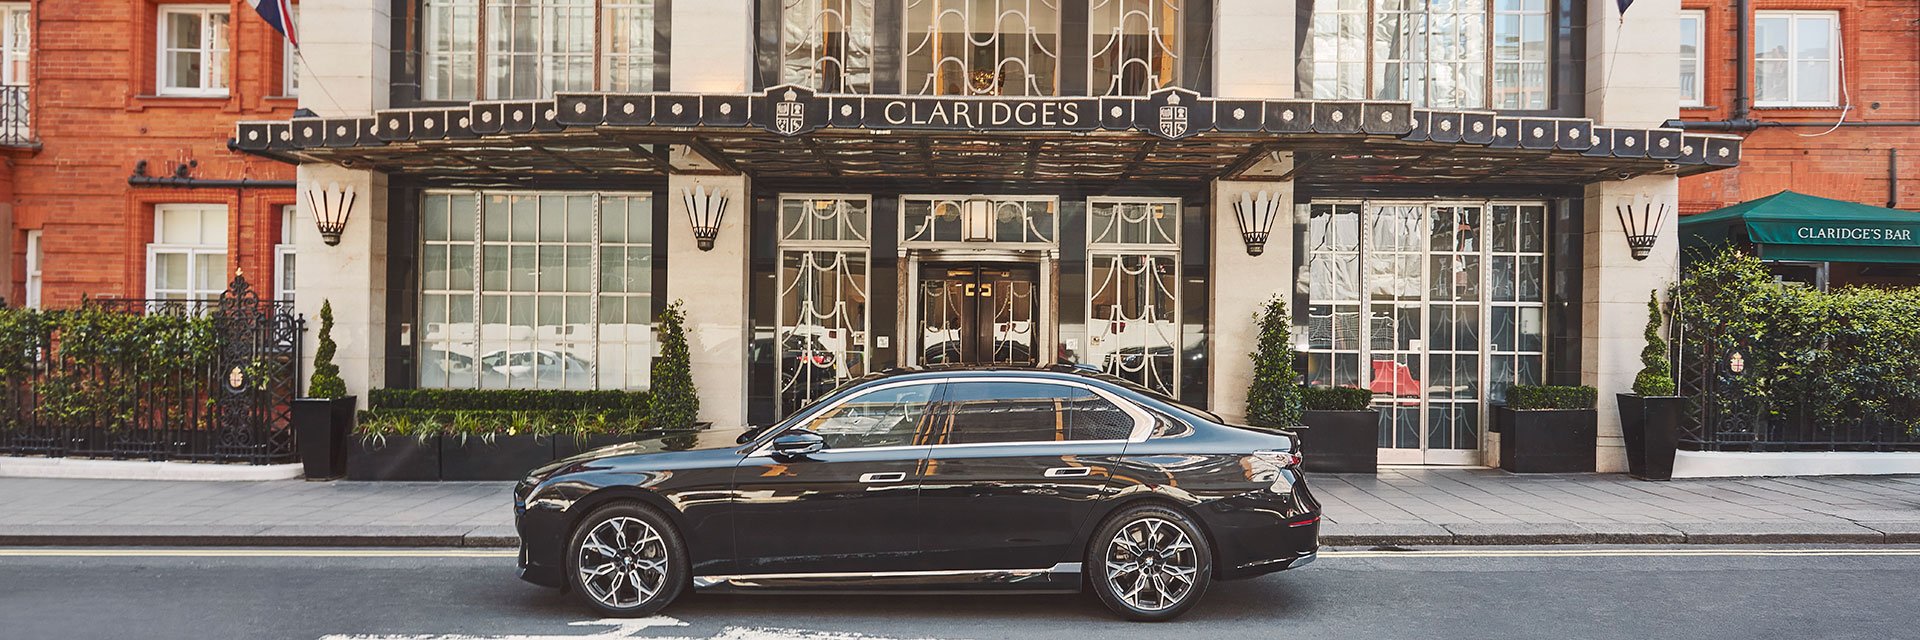 Exterior of Claridge's hotel with car fleet parked outside the entrance